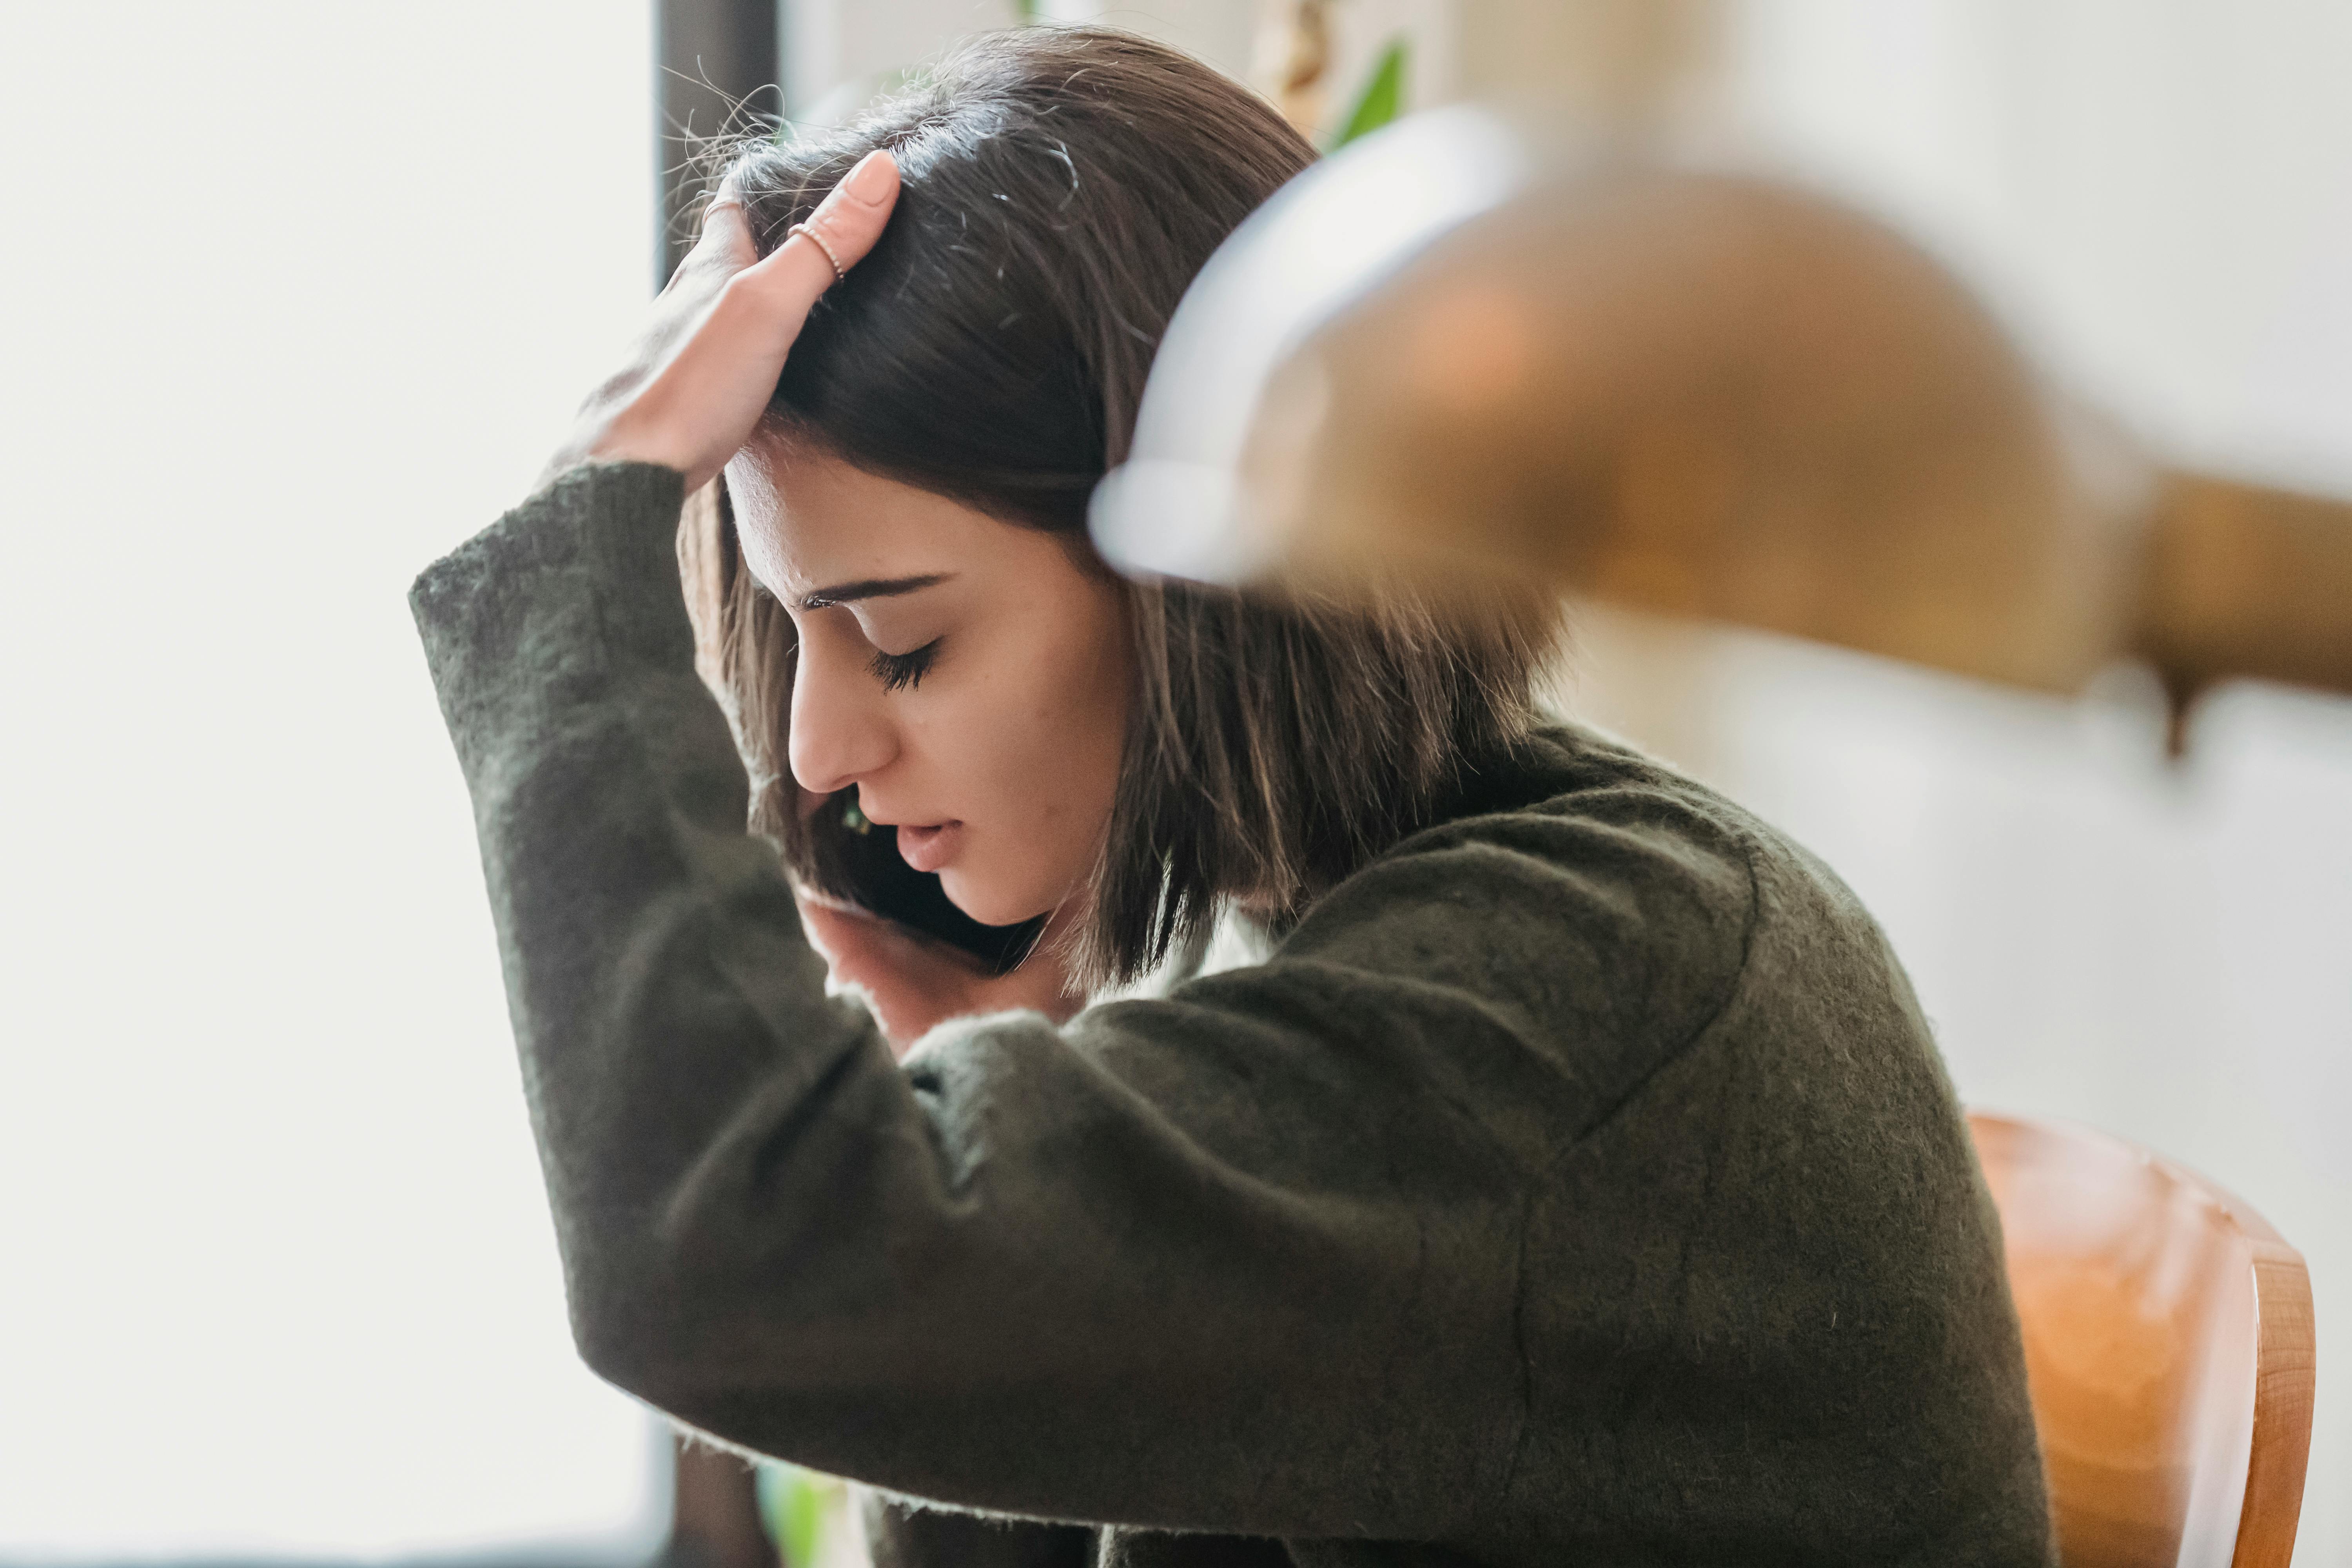 A disappointed young woman touching her head while talking on the phone | Source: Pexels